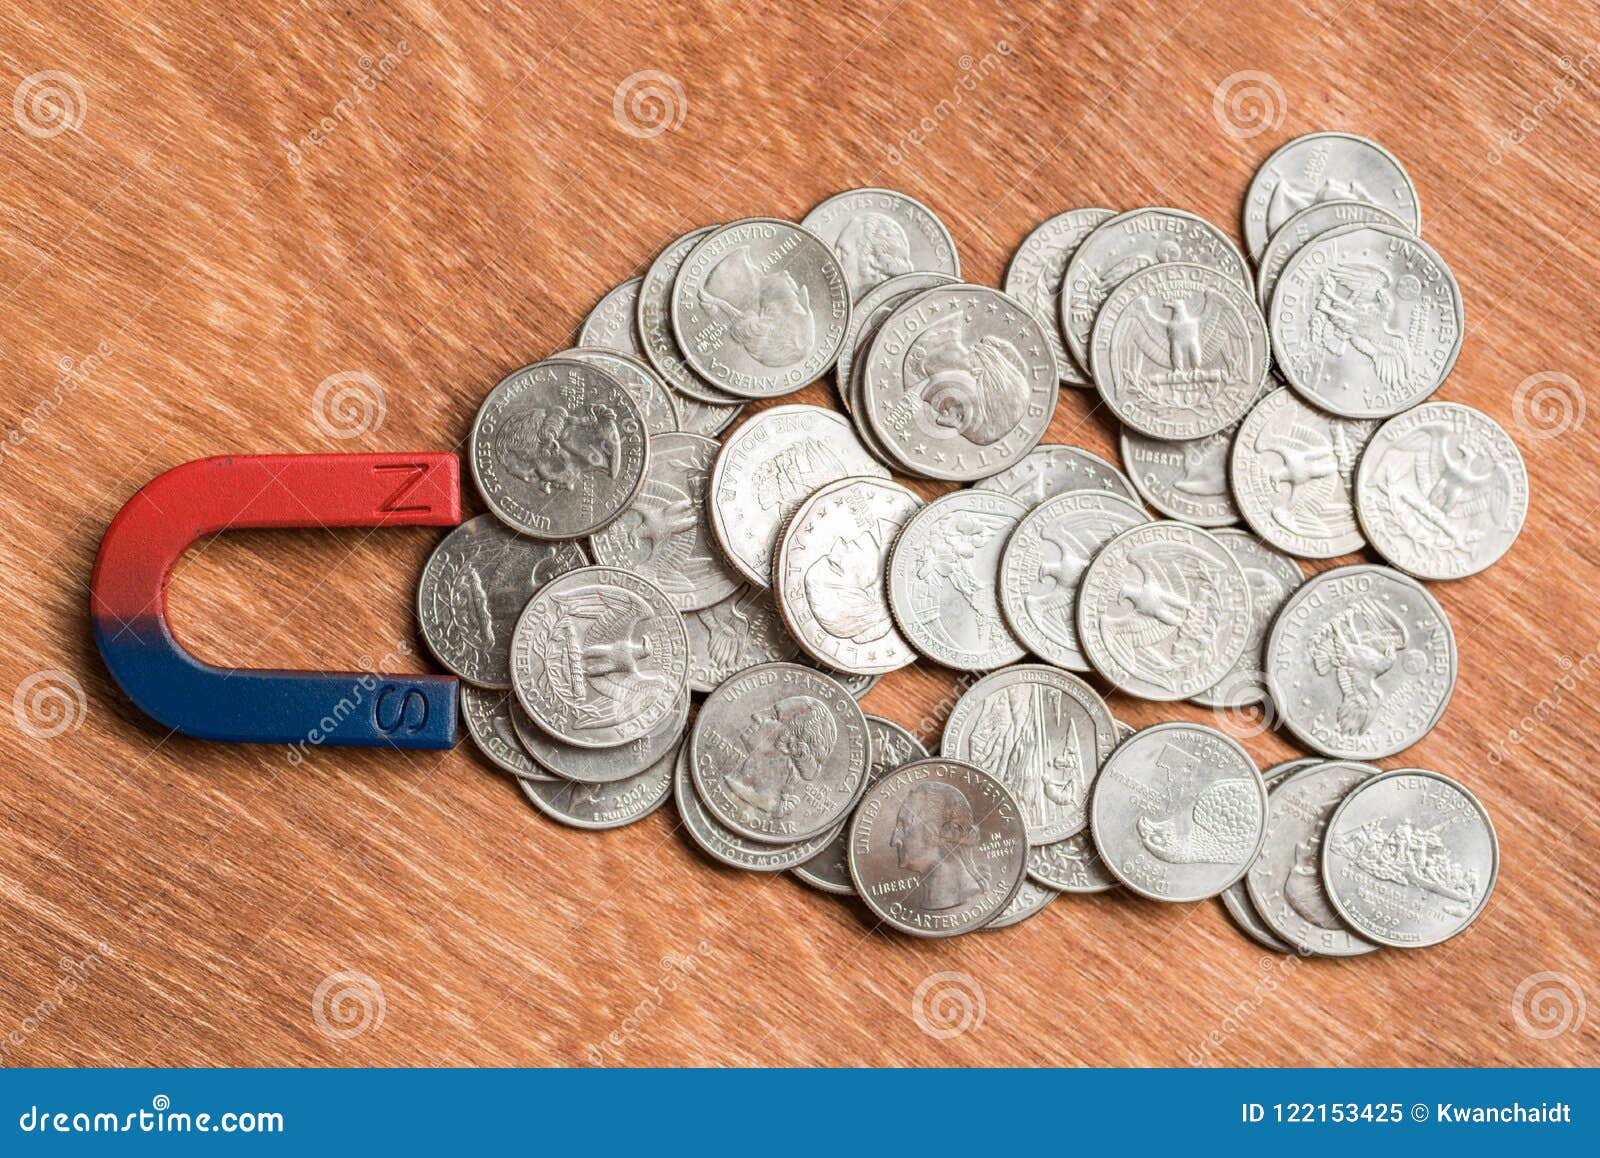 Magnetic pull the coins stock image. Image concept - 122153425